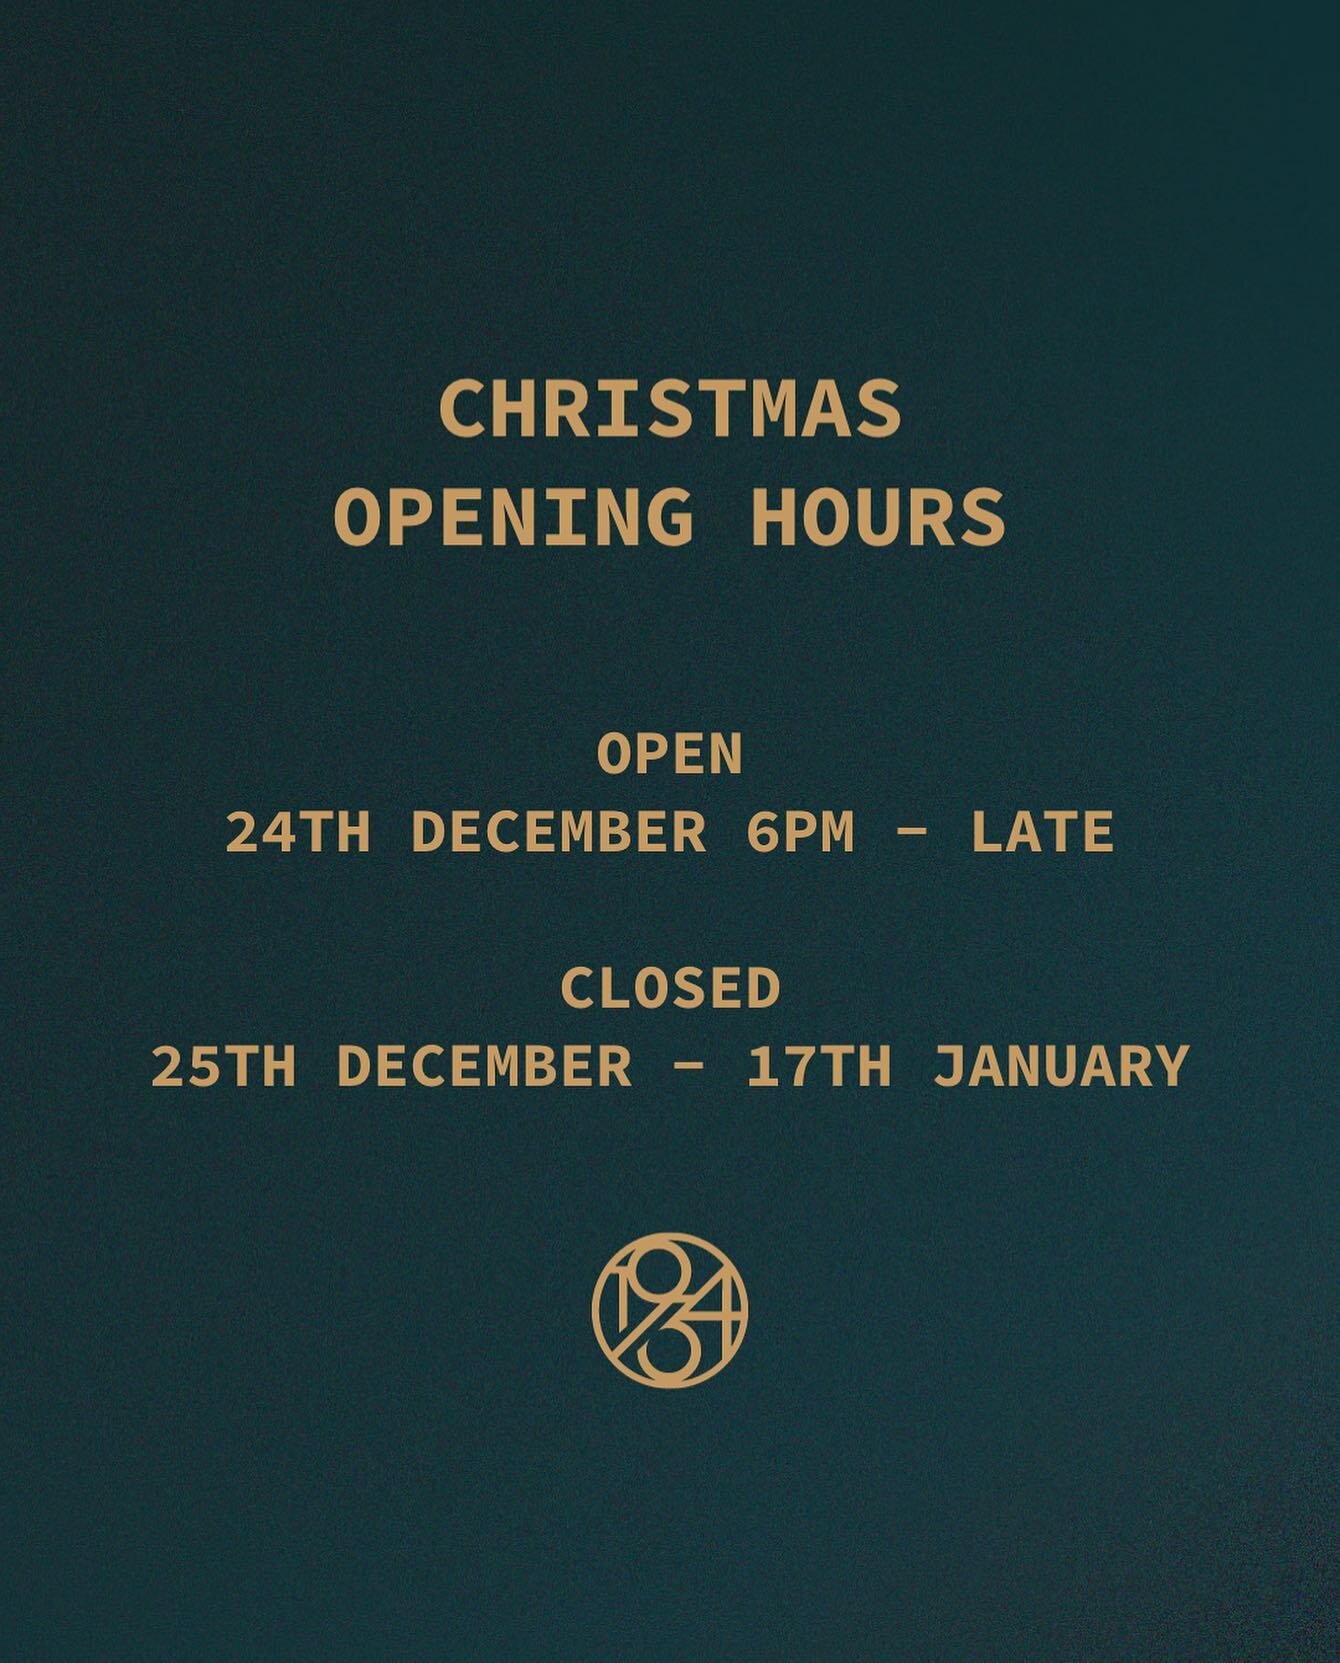 Your Christmas eve dinner plans are sorted!⁠
⁠
We will be open for dinner on the 24th of December, then closing from the 25th of December to the 17th of January 2023.⁠
⁠
Click the link in bio to book for Christmas eve. ⁠